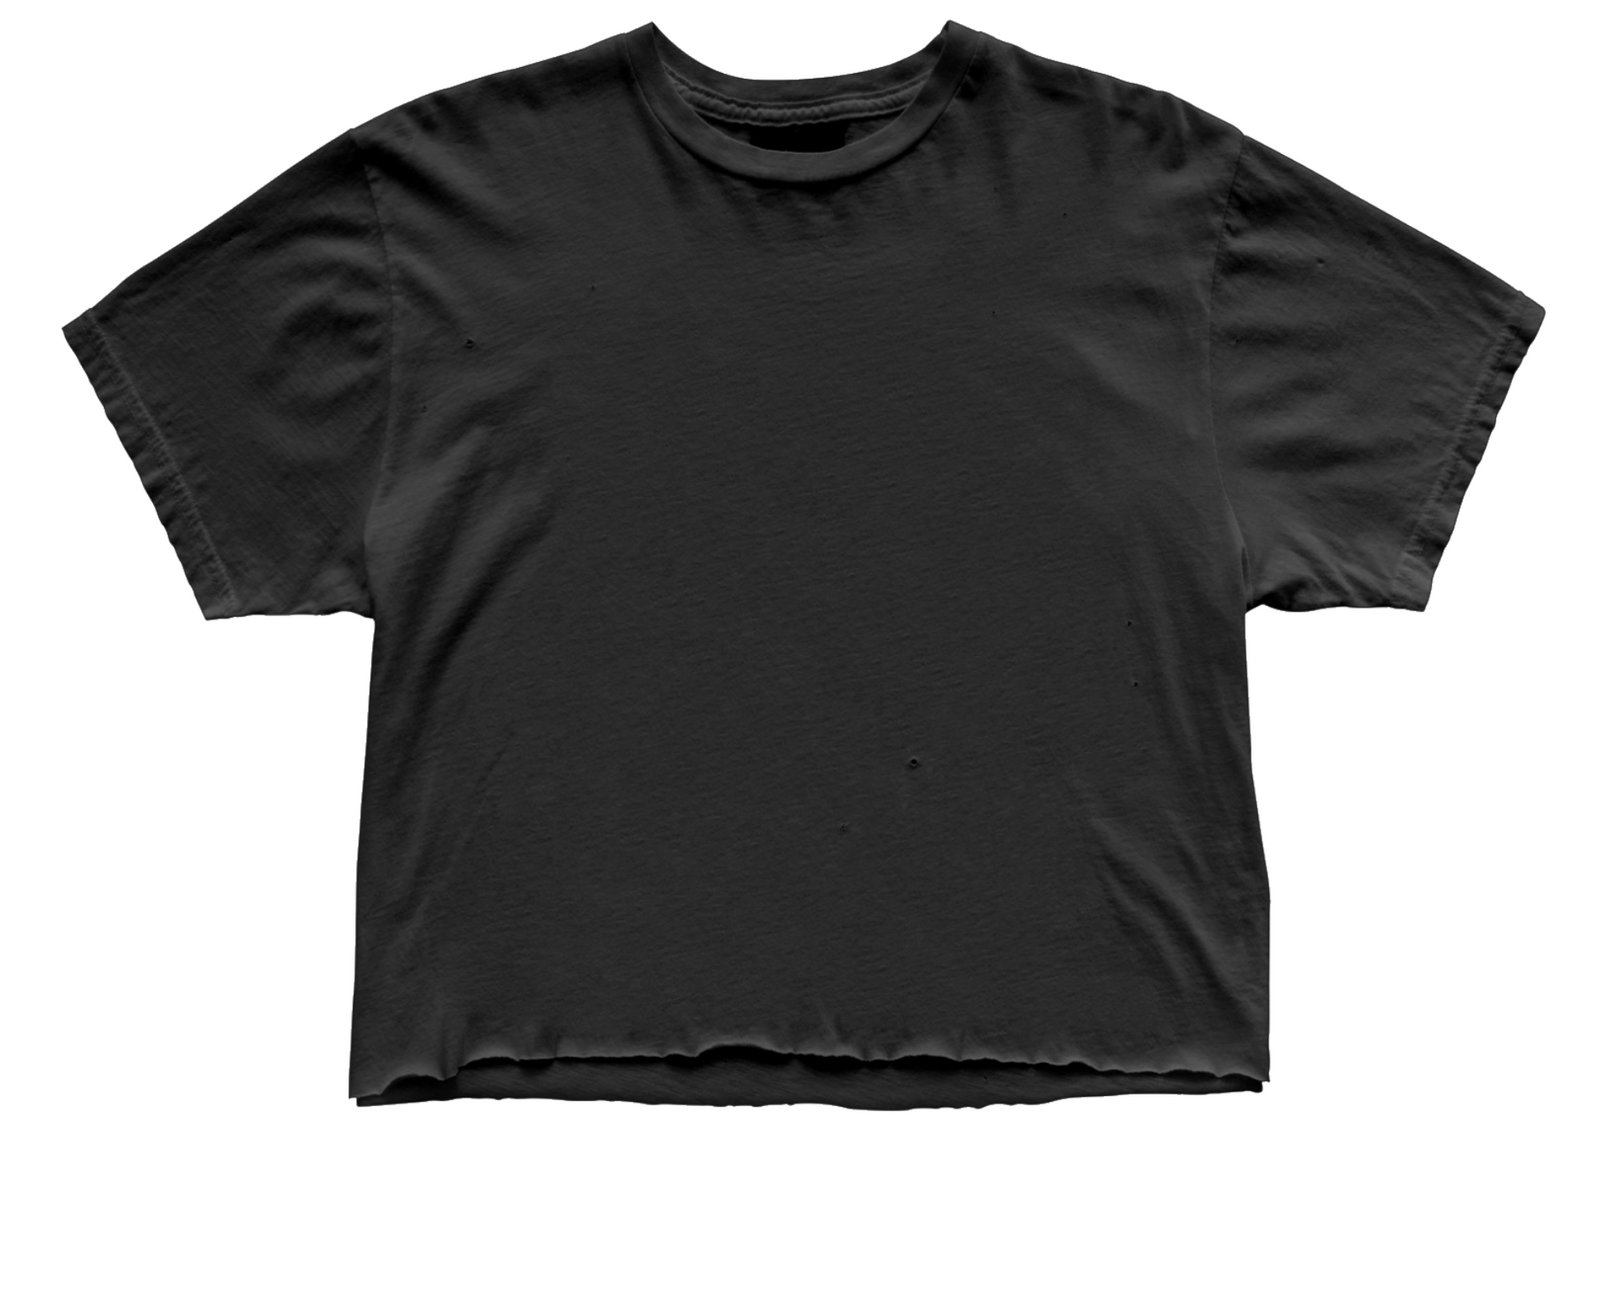 American Made Black Label Cropped Tee